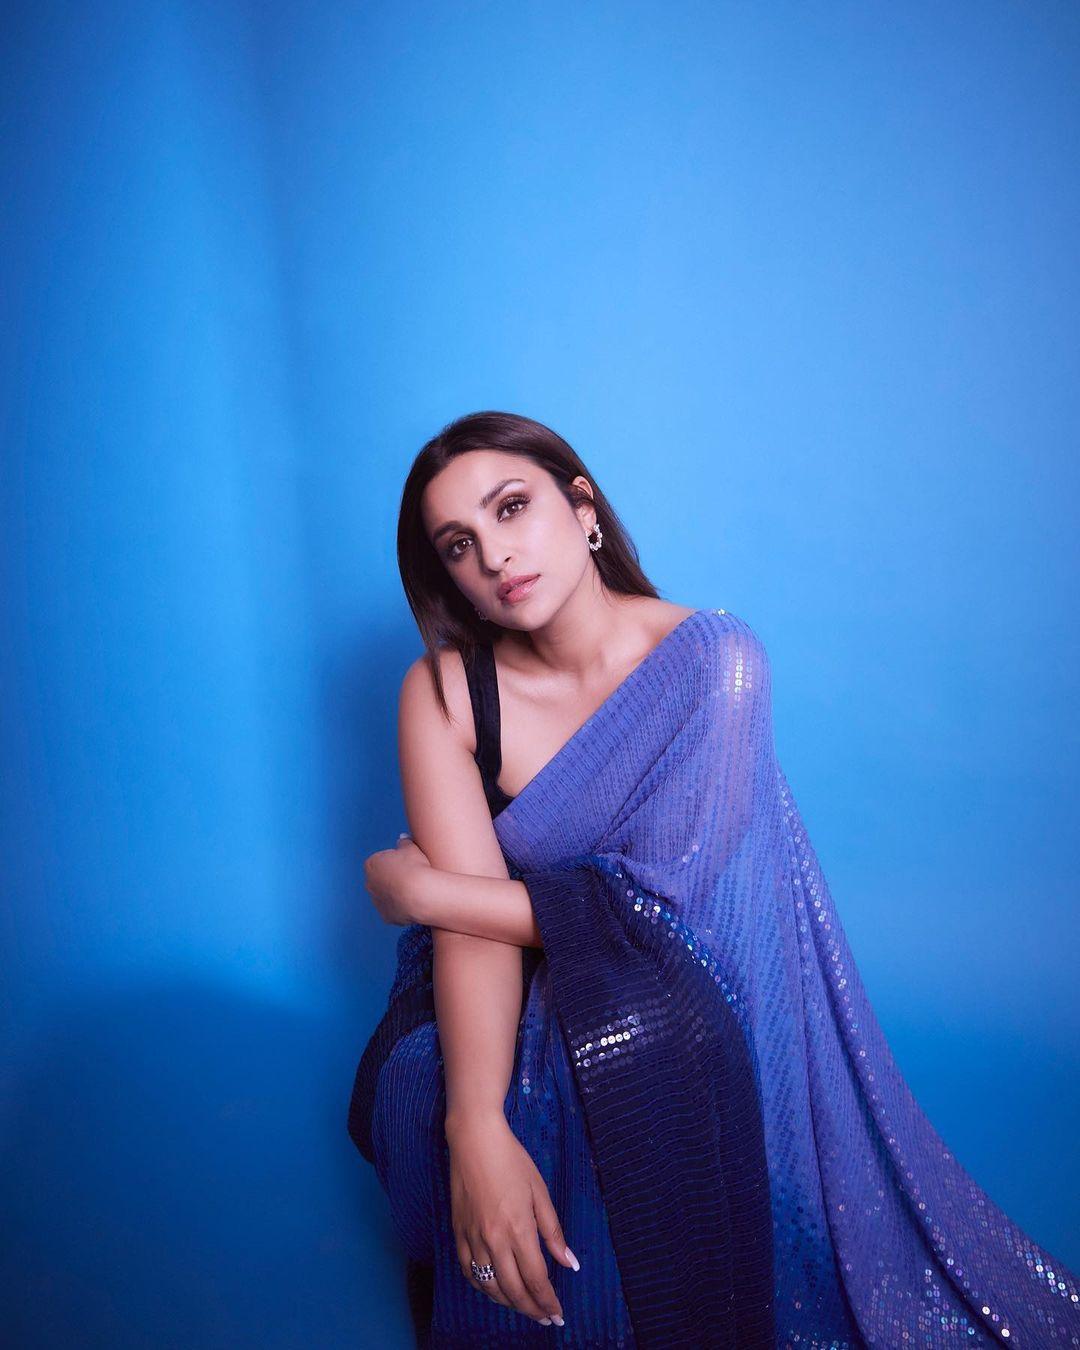 Parineeti Chopra donned a breathtaking indigo-coloured sequin saree, showcasing a look that could be the epitome of elegance for attending your best friend's wedding